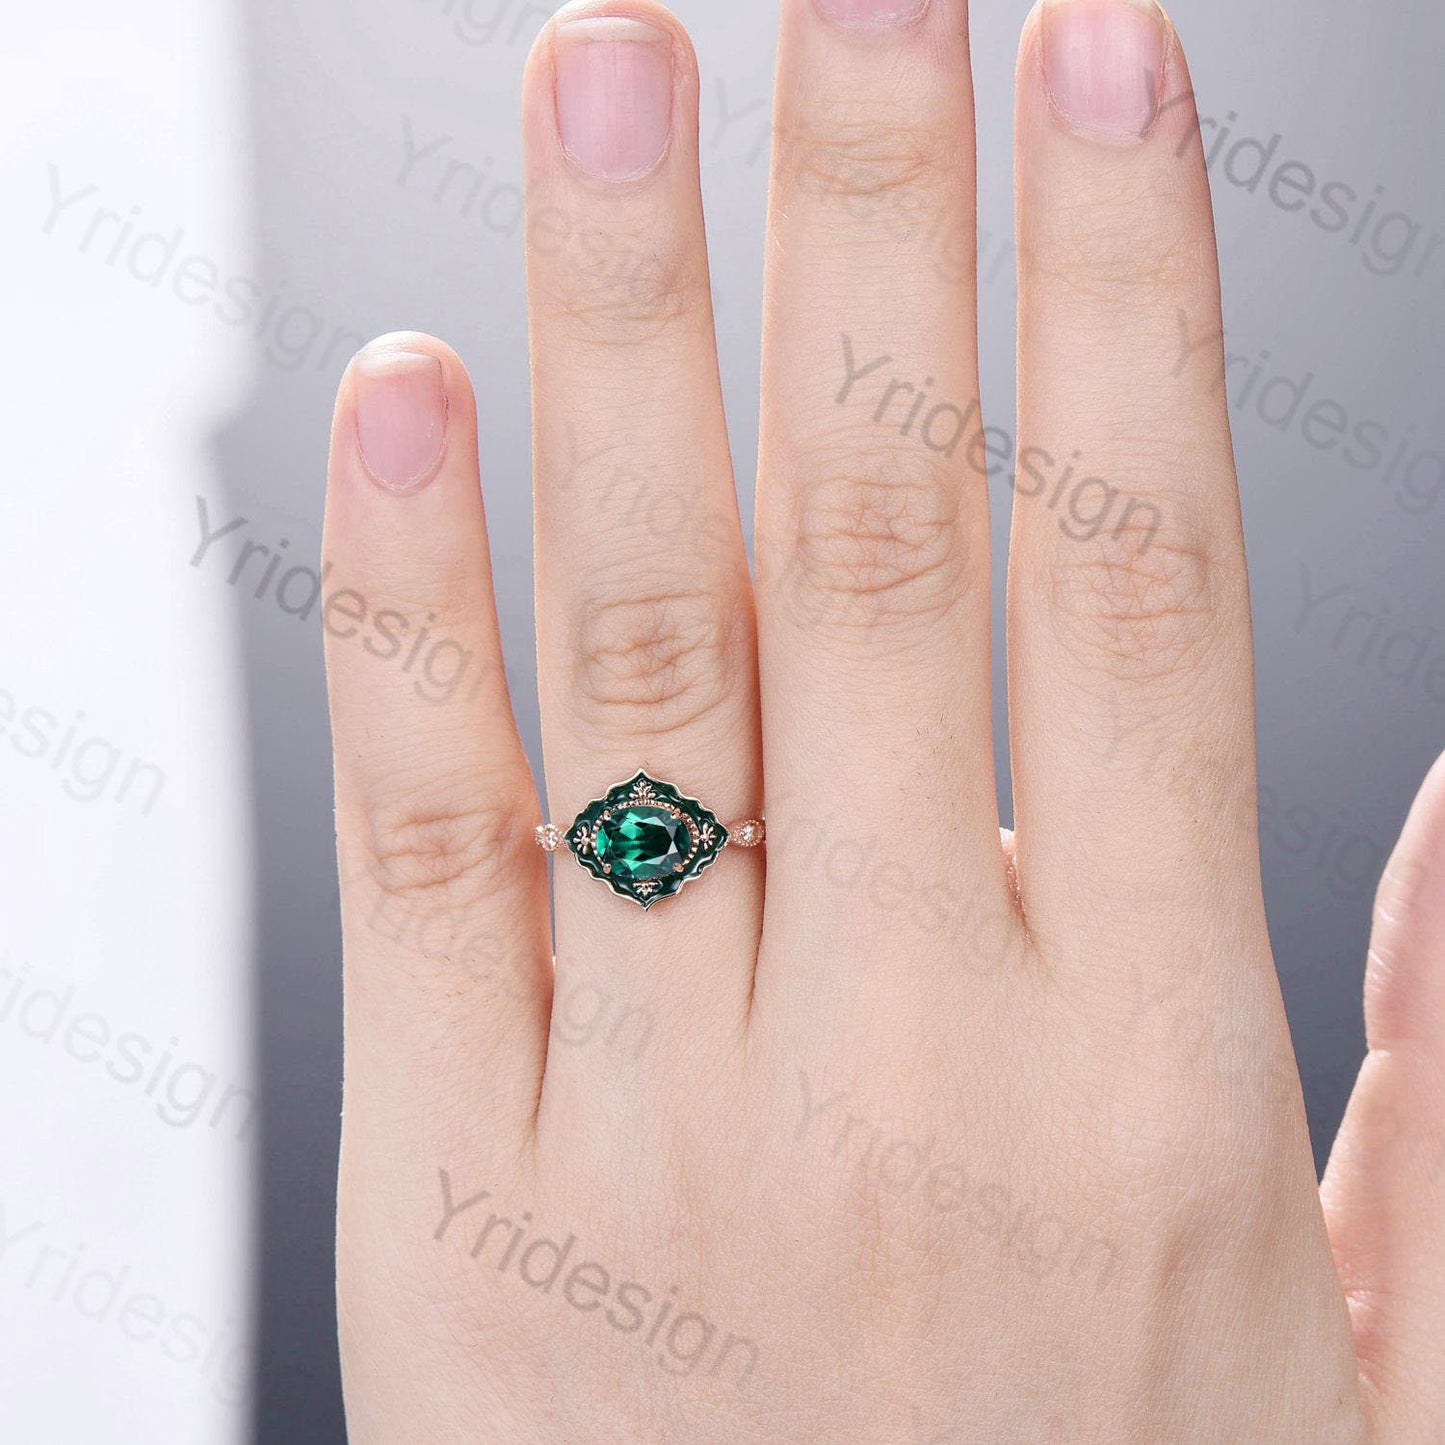 Vintage Emerald Engagement Ring Unique Enamel Green Crystal Wedding Ring Women Solid Yellow Gold Art Deco Antique Anniversary Gift For Her - PENFINE